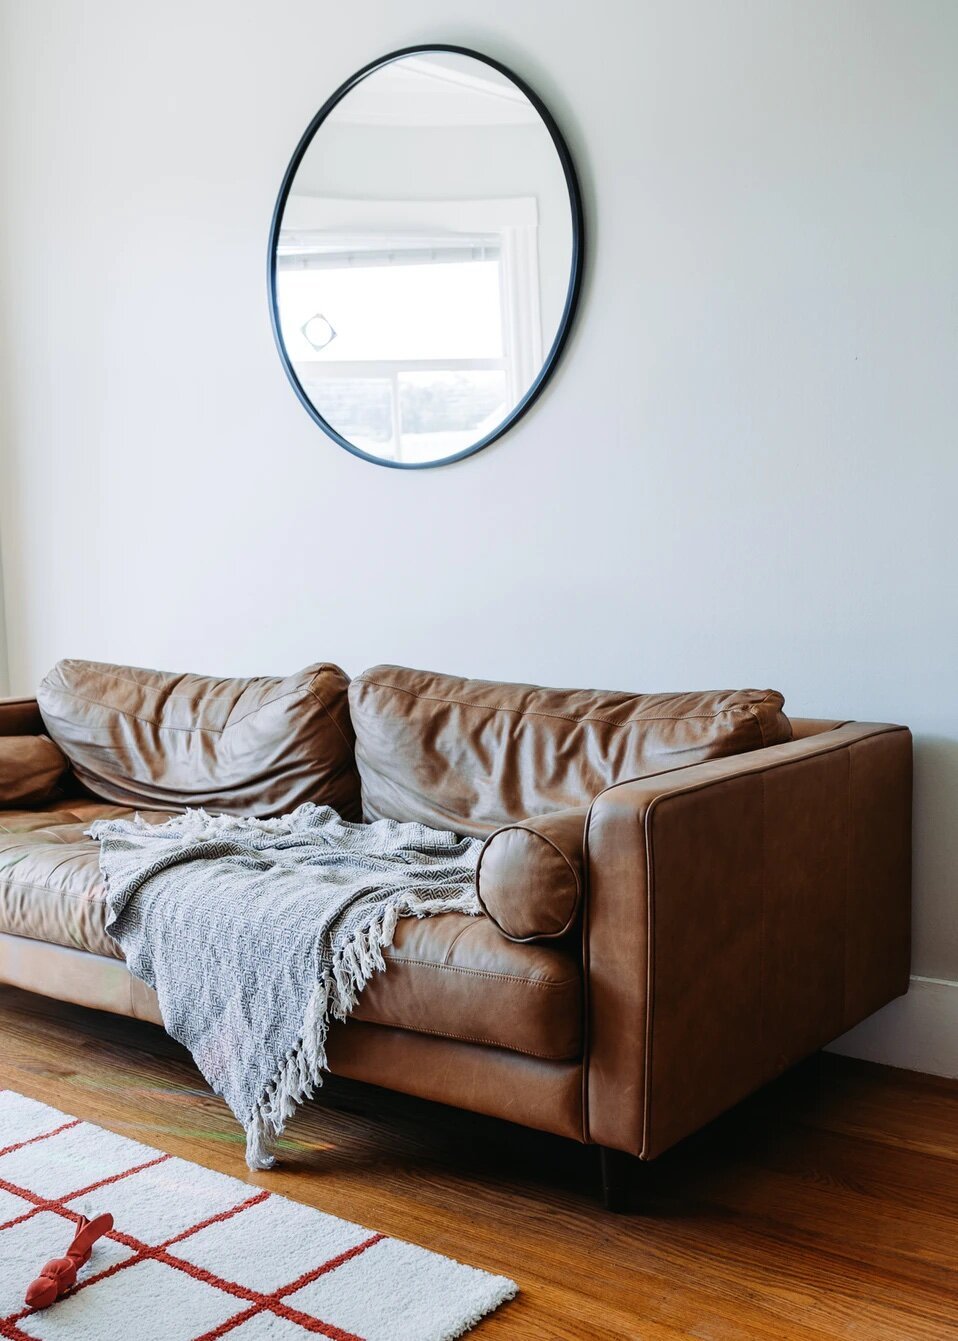 Justin's brown leather couch — this one shows up in the Codex series, too! 